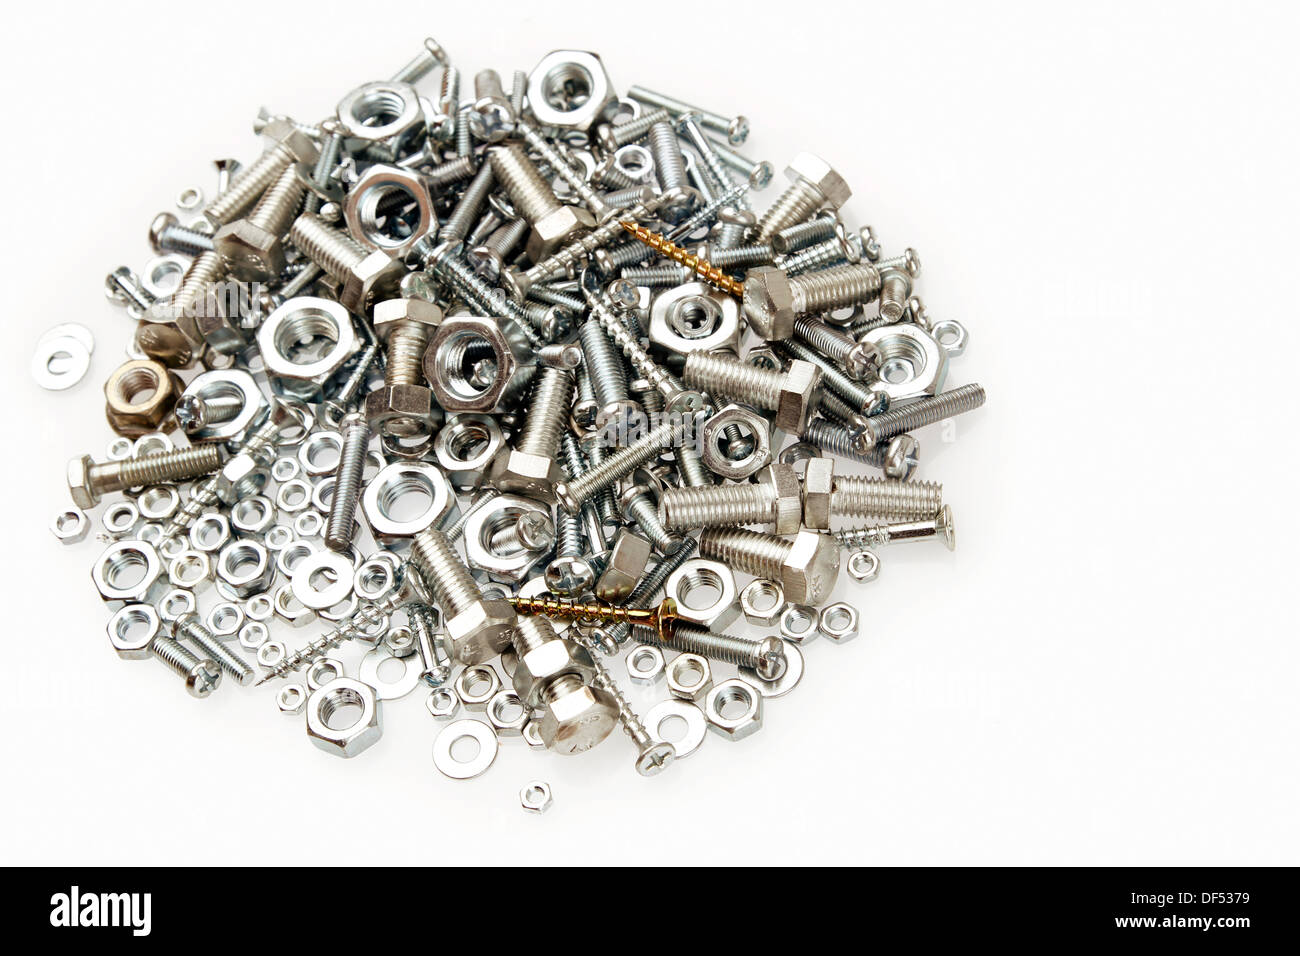 Pile of nuts and bolts Stock Photo